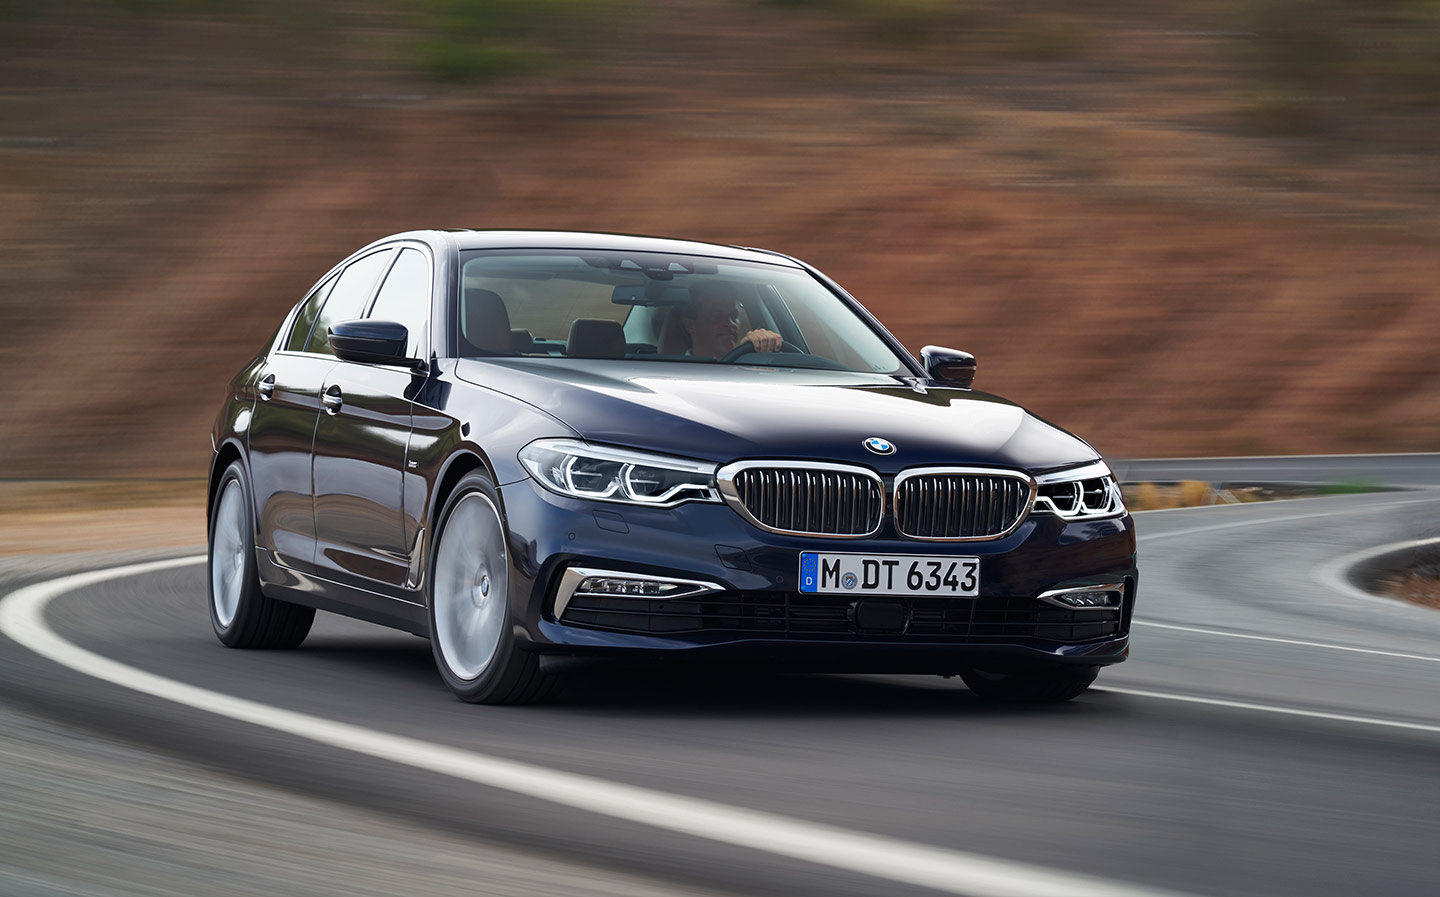 The Clarkson Review: 2017 BMW 5-series 530d (G30)